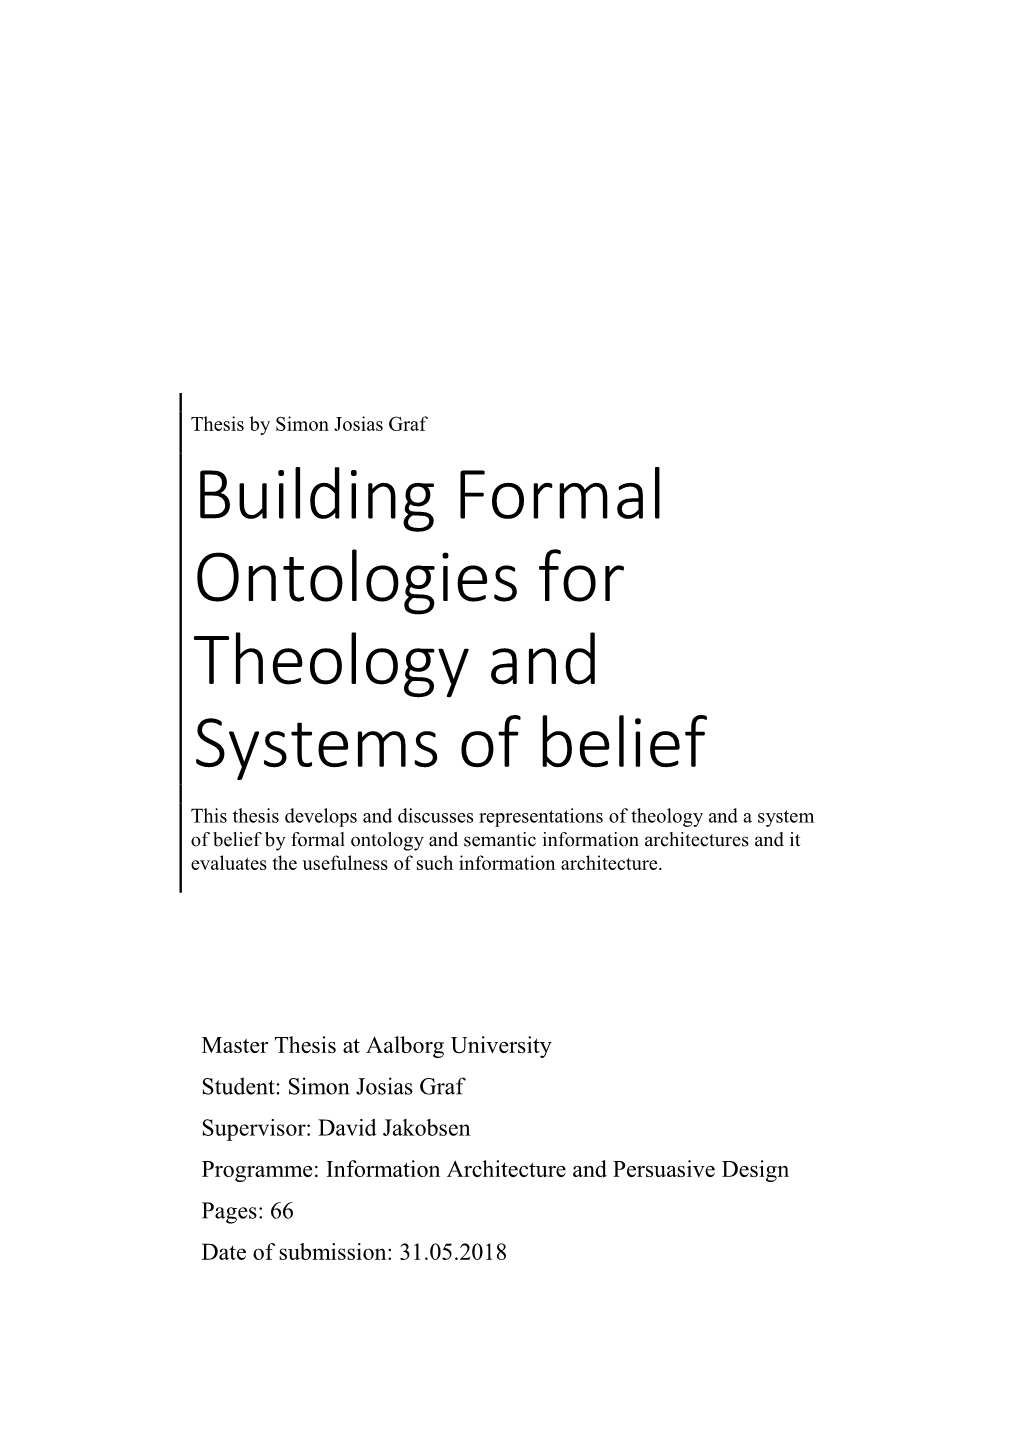 Building Formal Ontologies for Theology and Systems of Belief